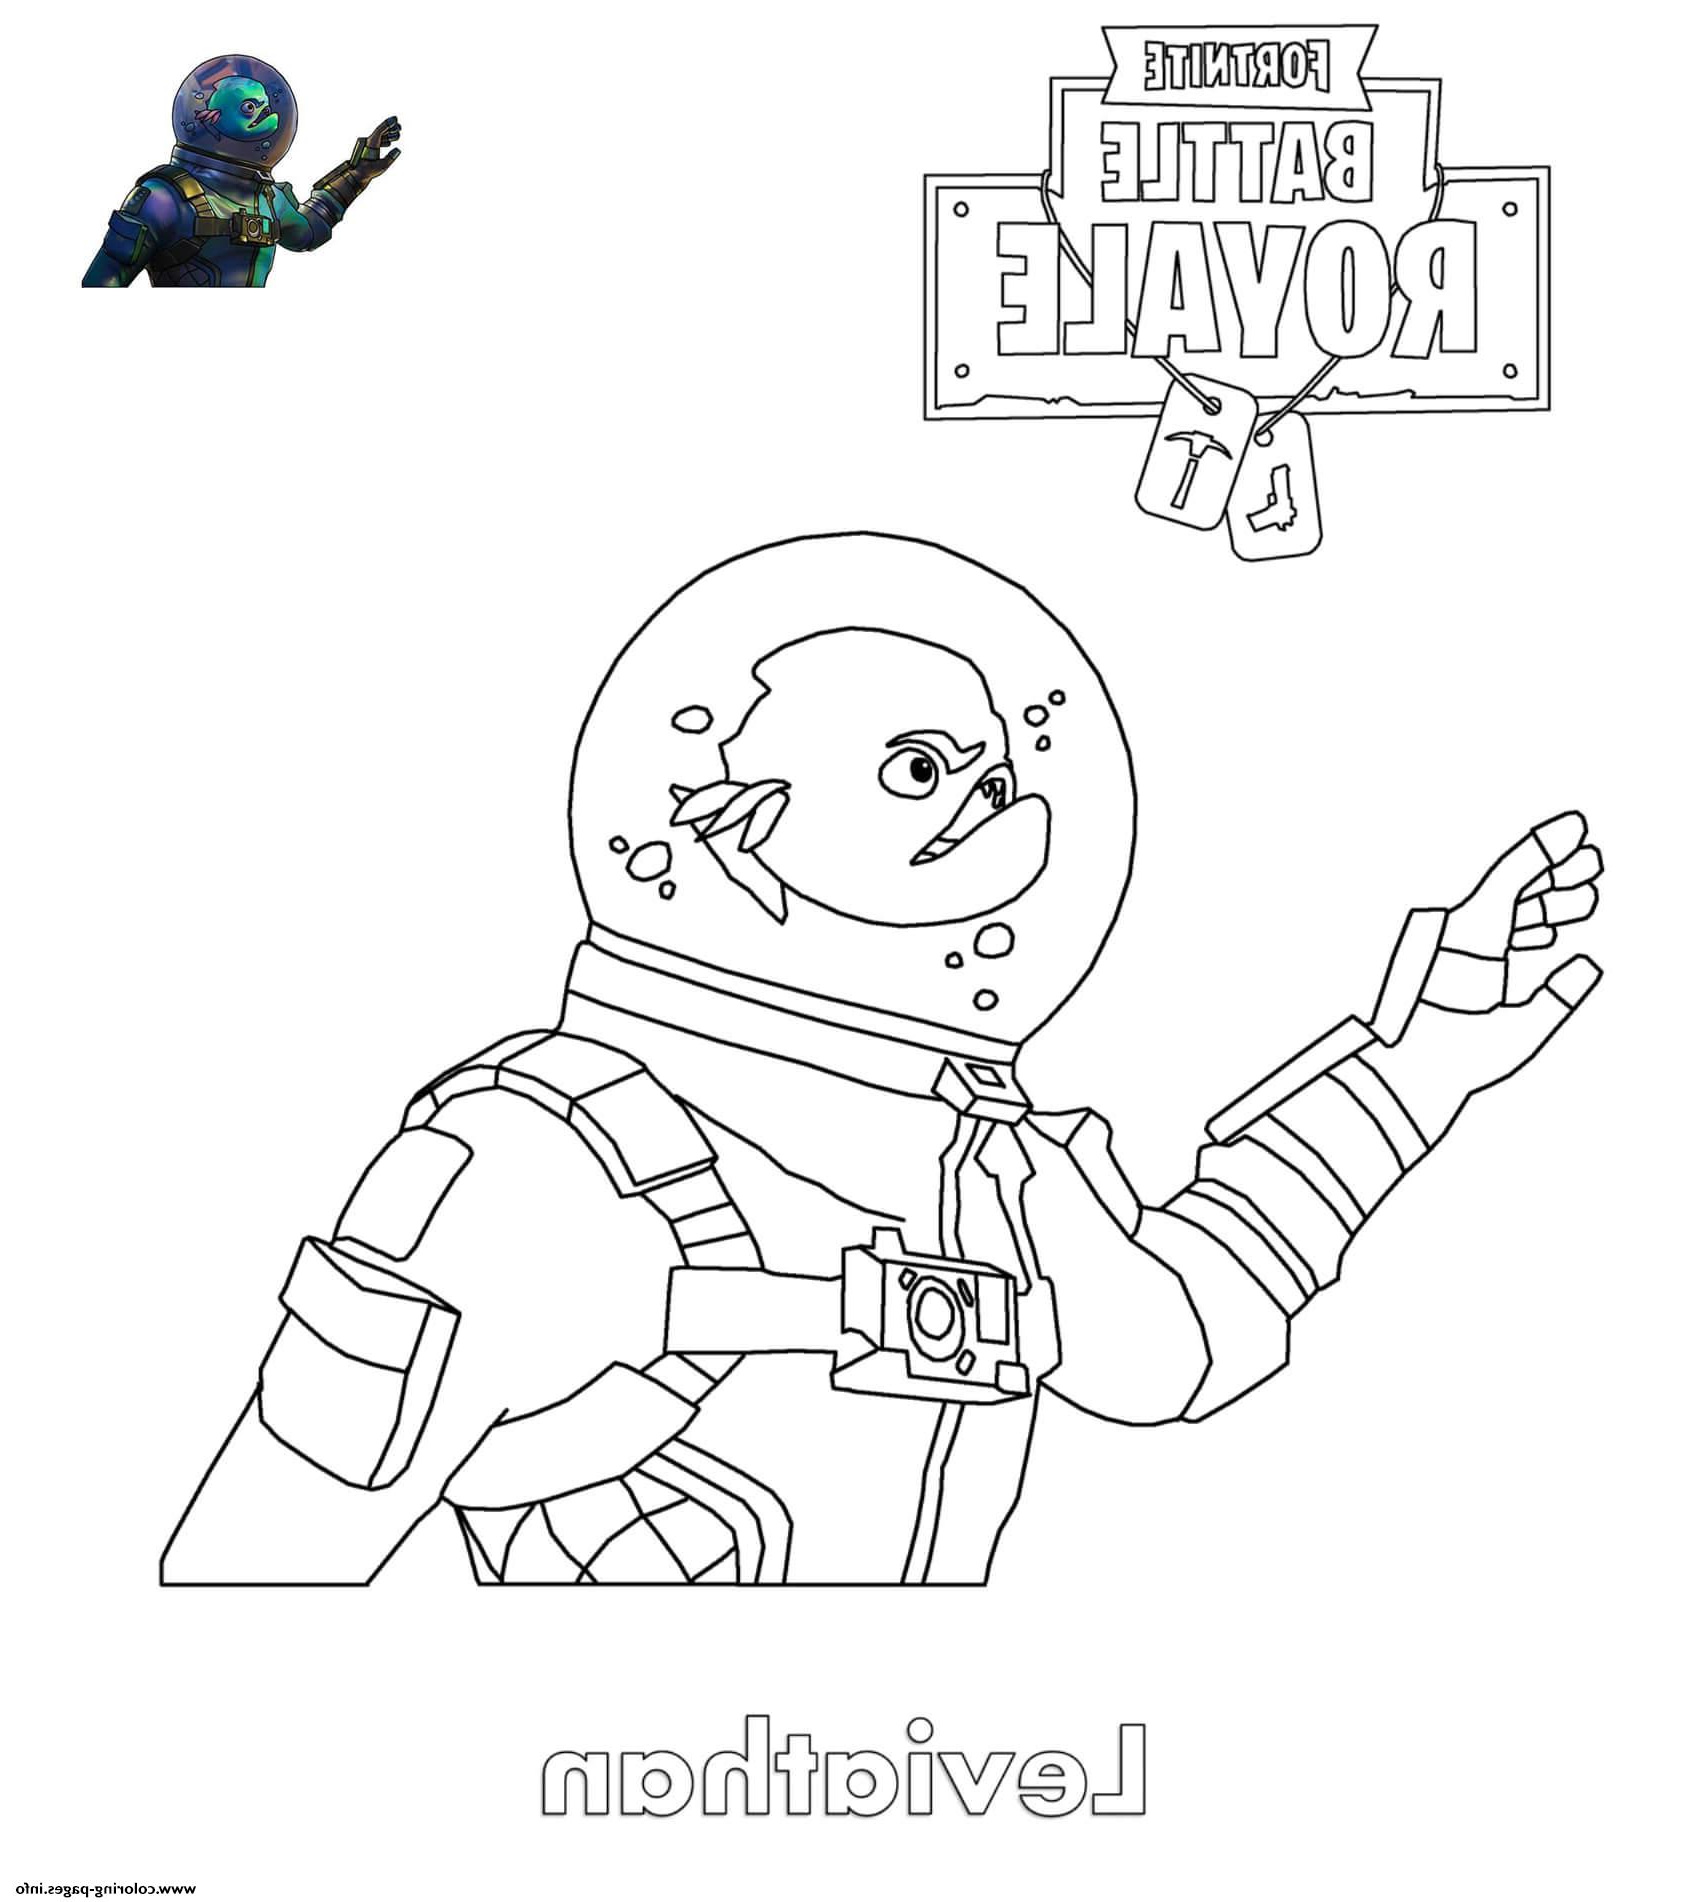 fortnite leviathan skin printable coloring pages book